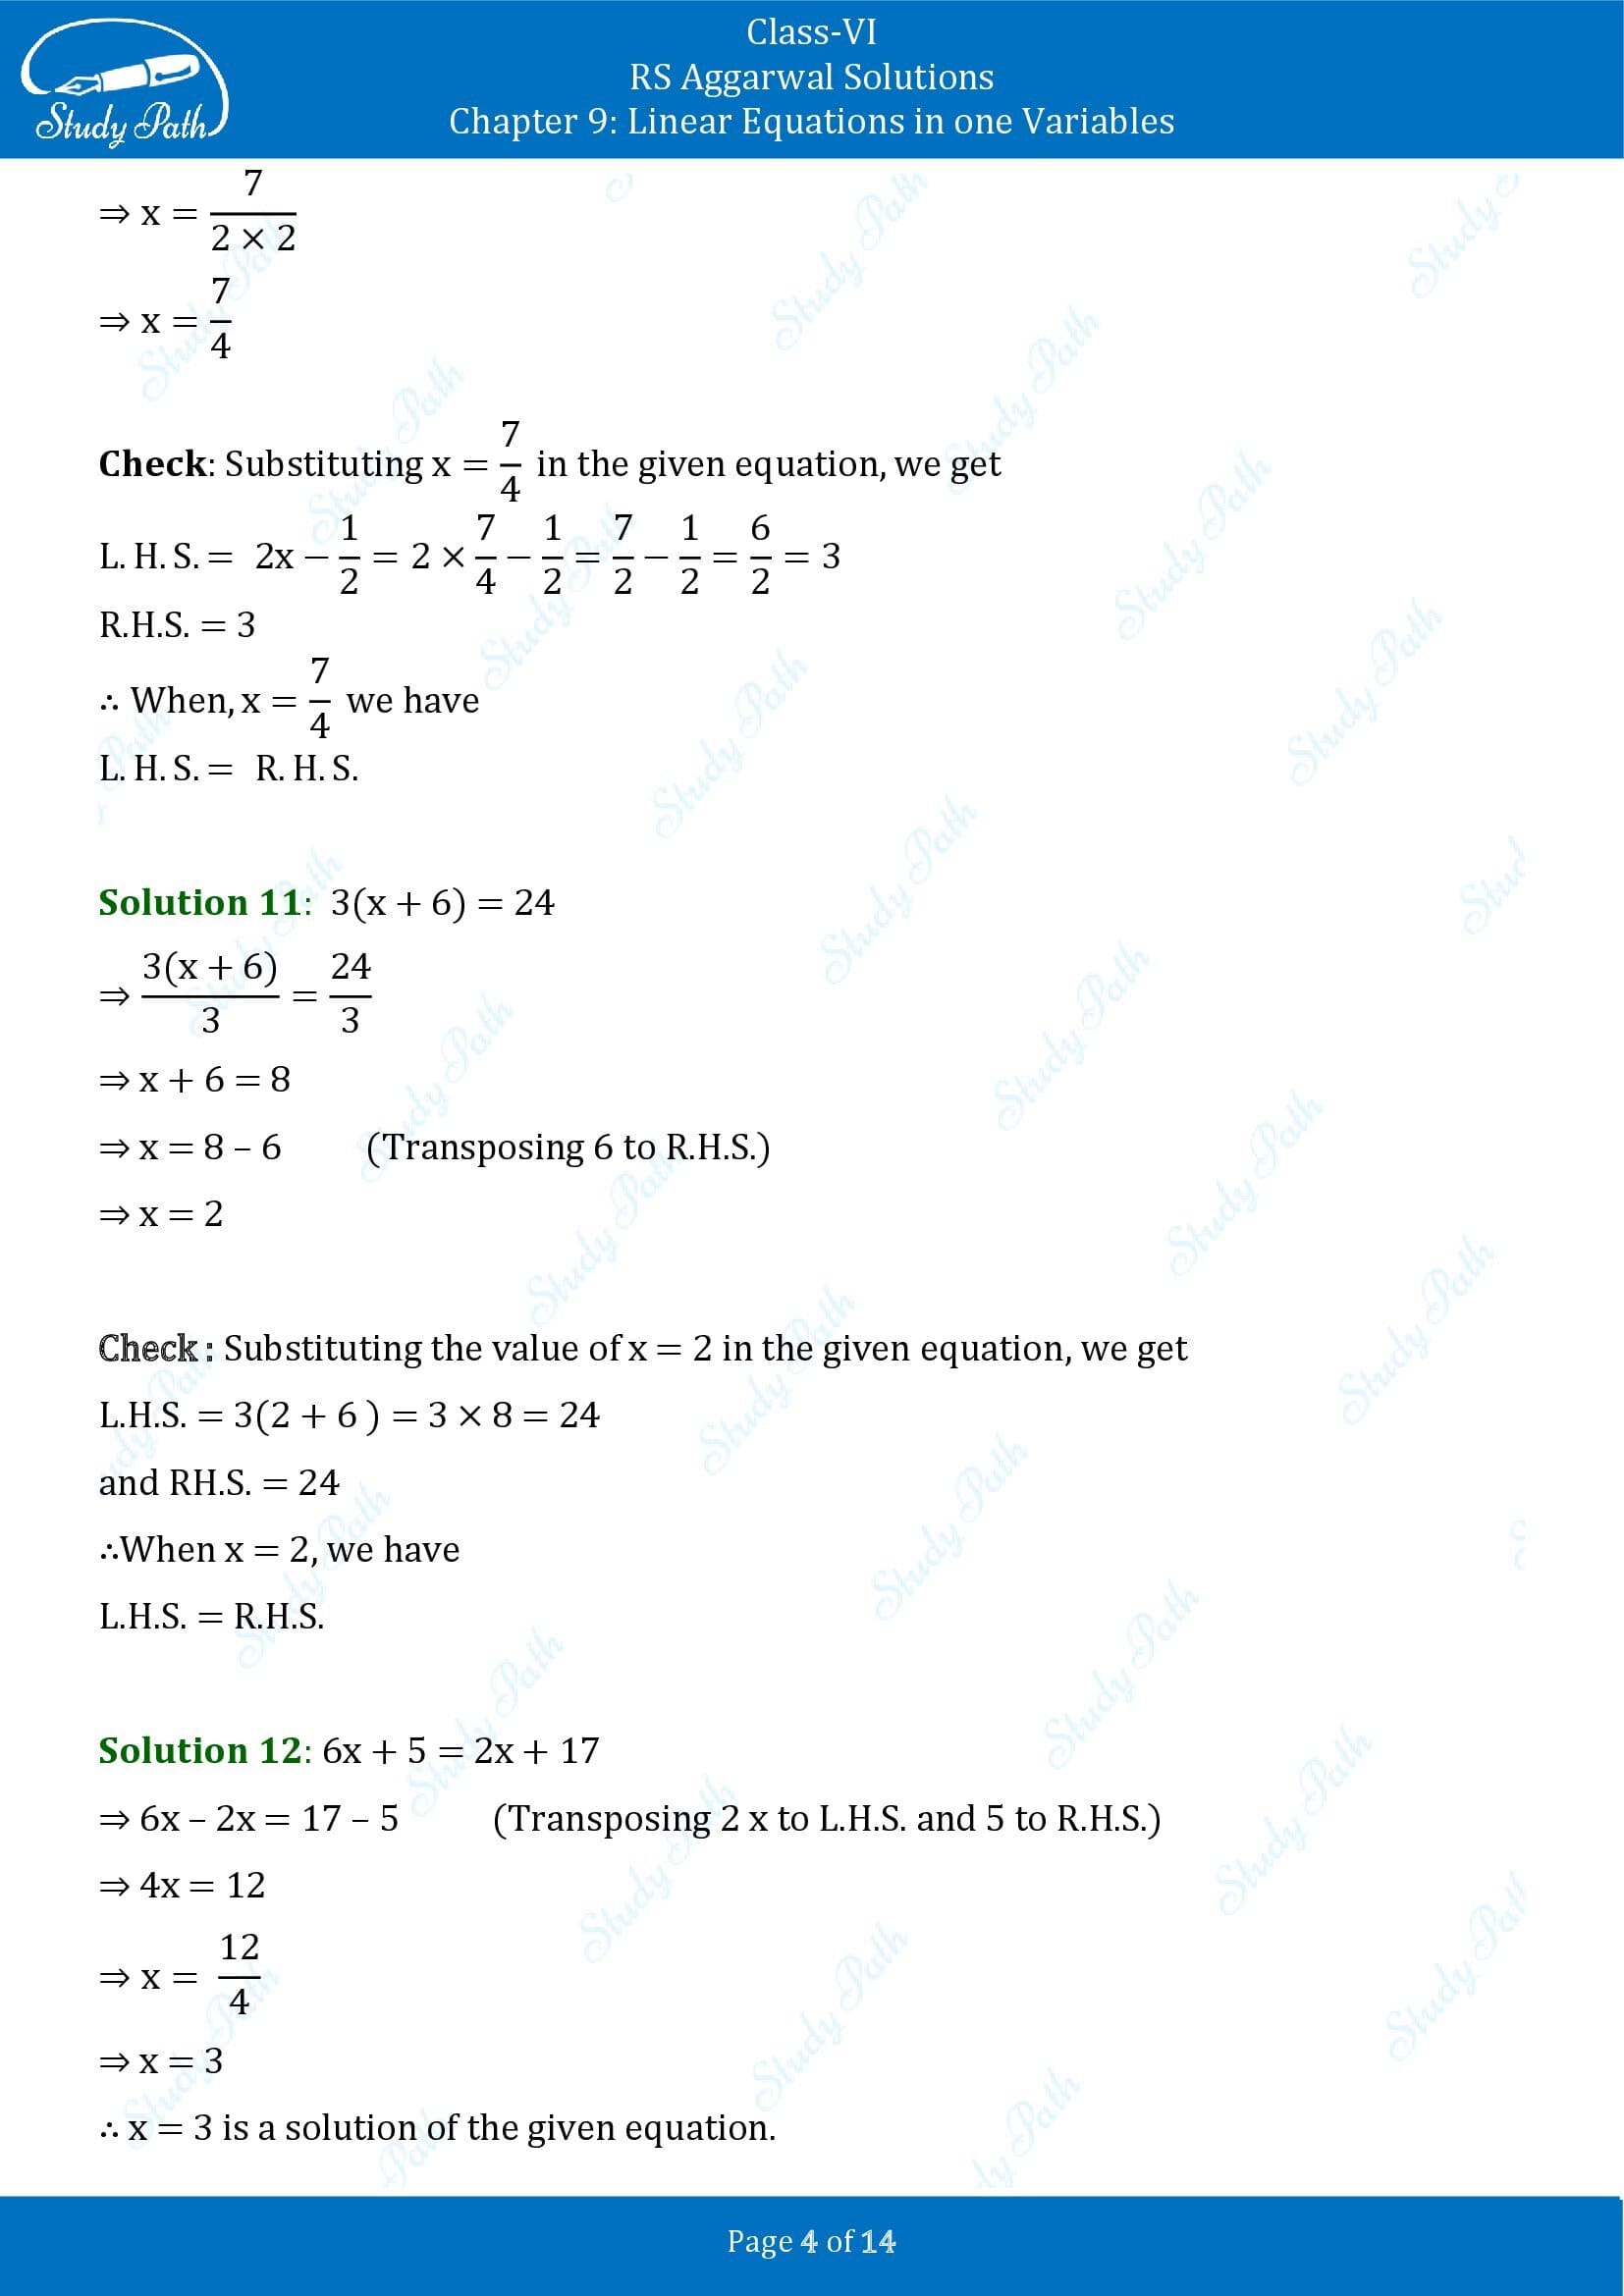 RS Aggarwal Solutions Class 6 Chapter 9 Linear Equations in One Variable Exercise 9B 00004